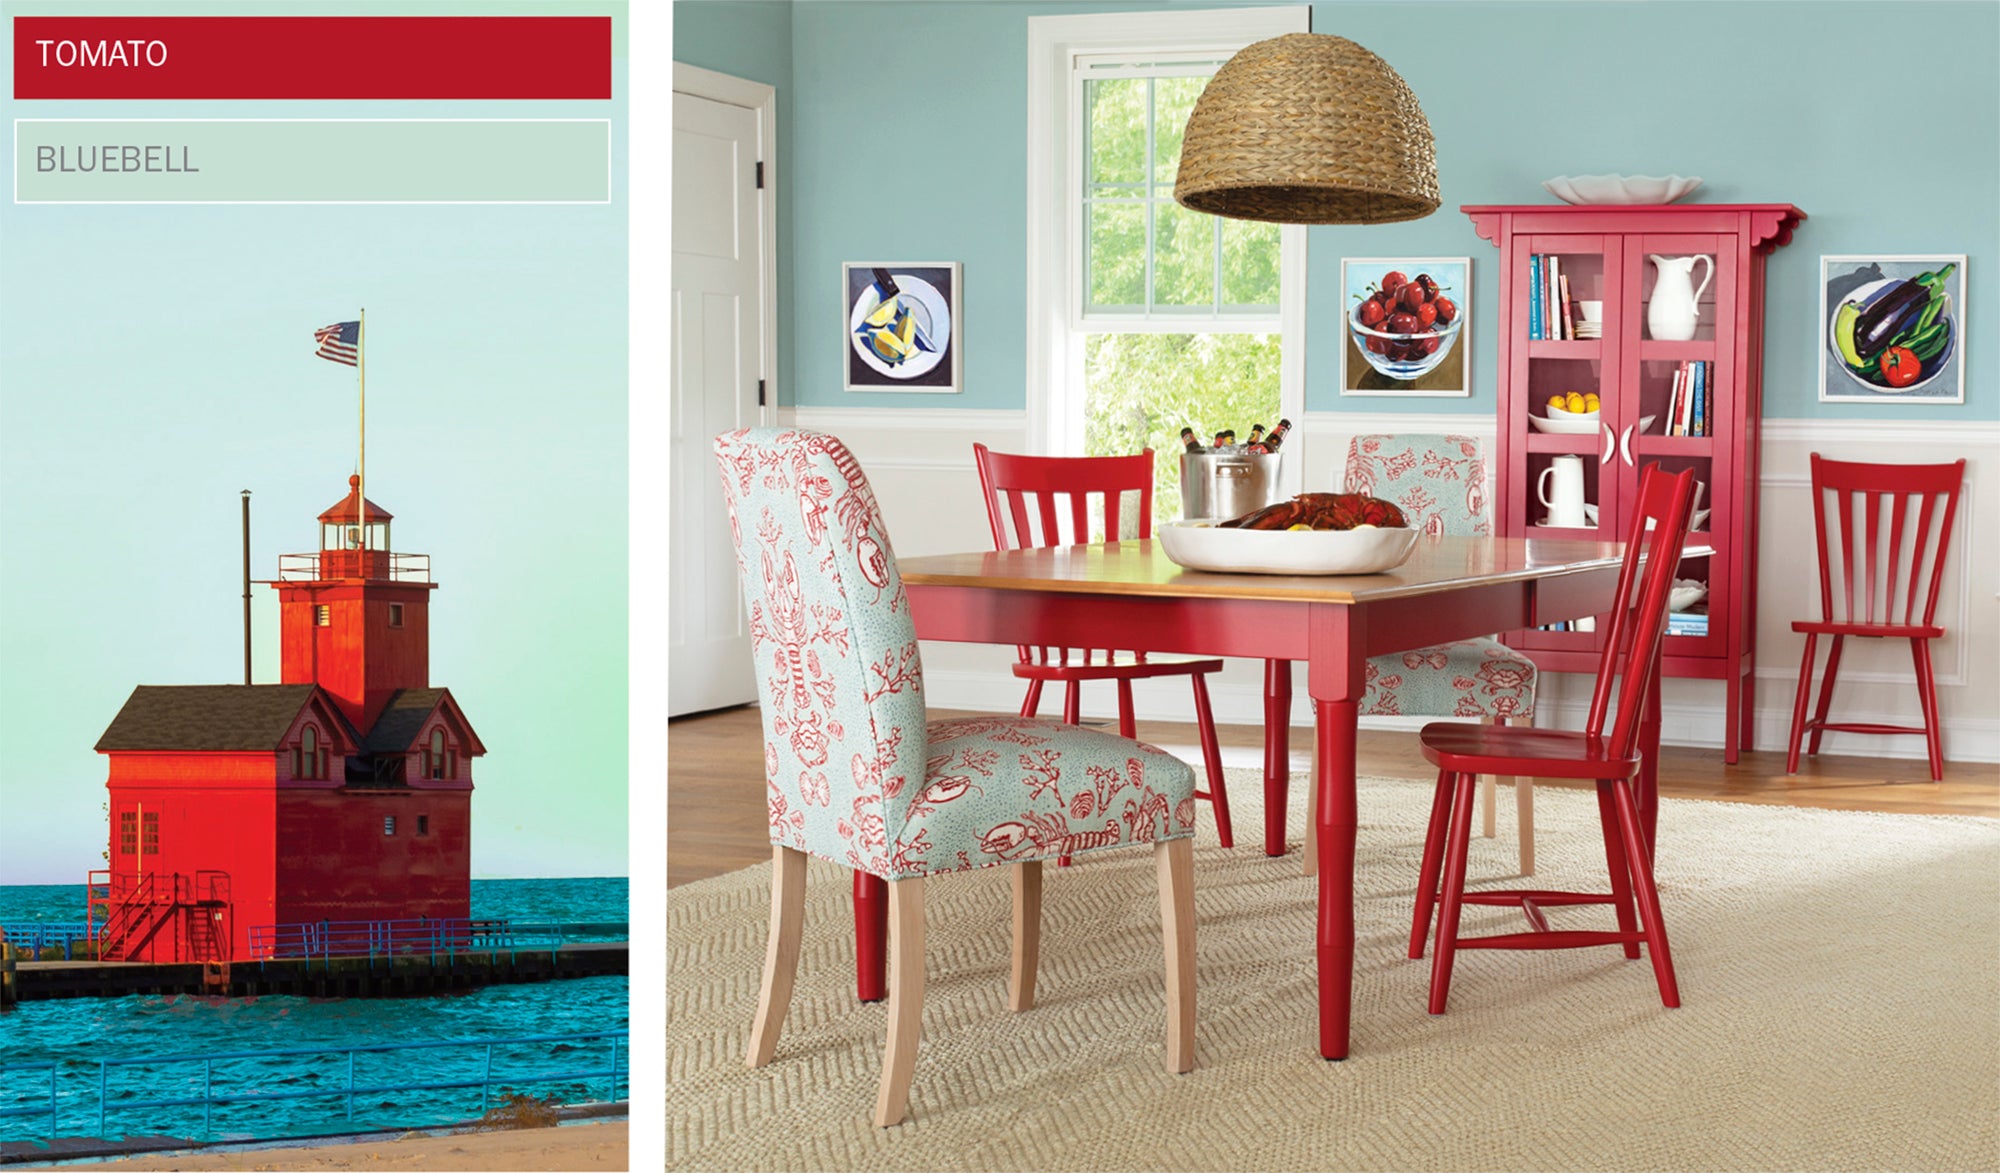 Extension dining table, upholstered and wood chairs, glass cabinet in red, jute rug, pendant light, Artwork: lemon, cherries